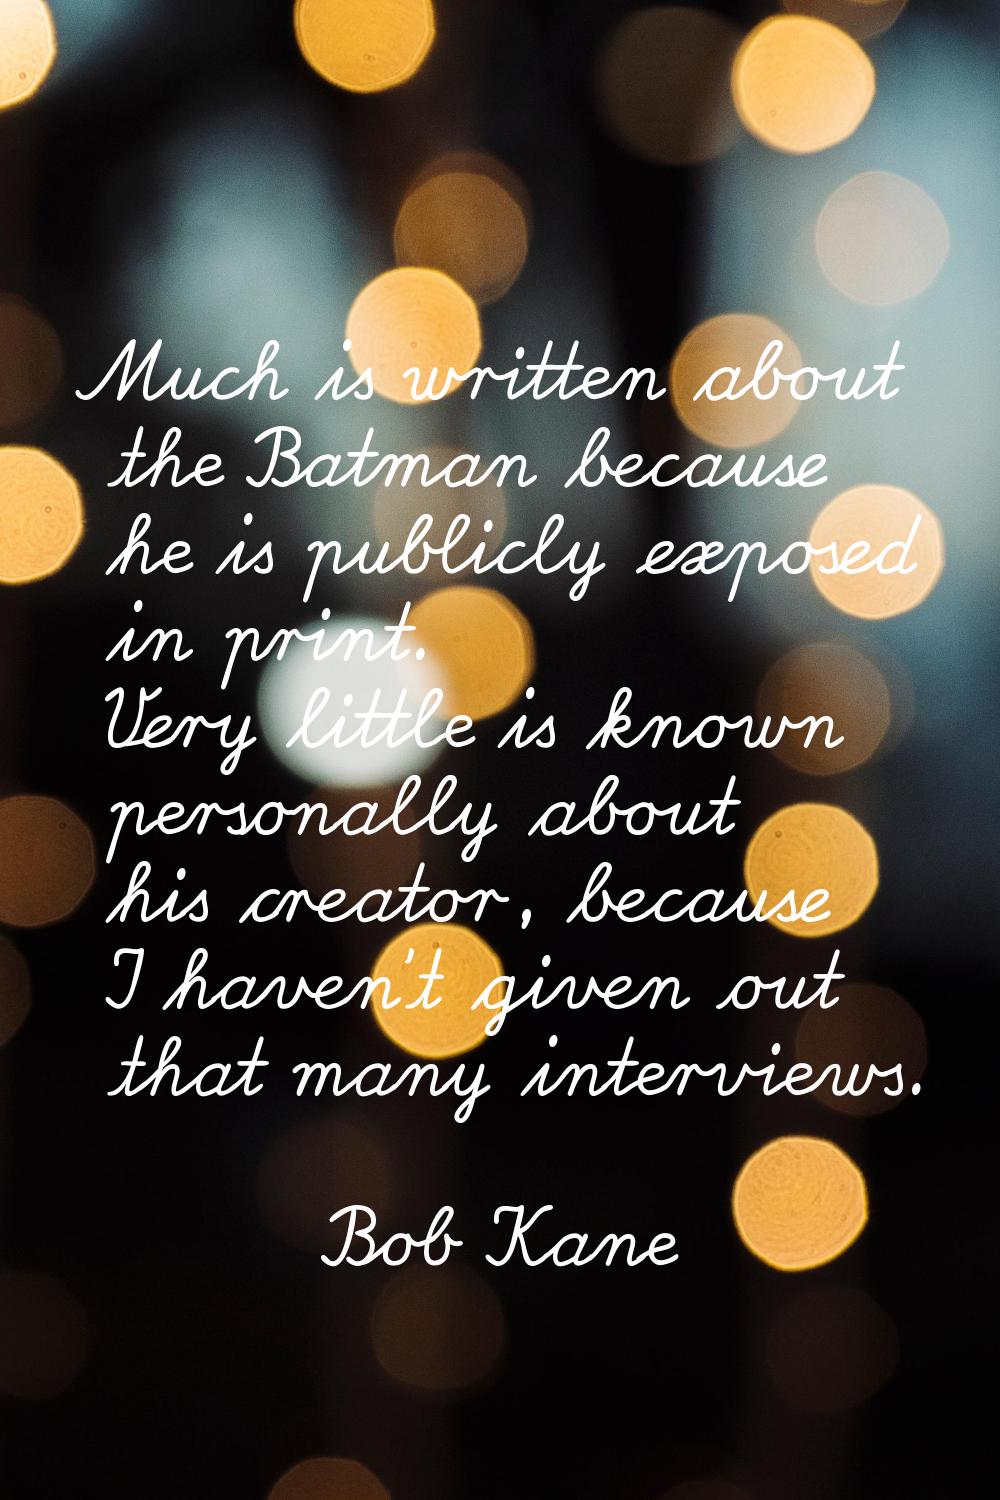 Much is written about the Batman because he is publicly exposed in print. Very little is known pers